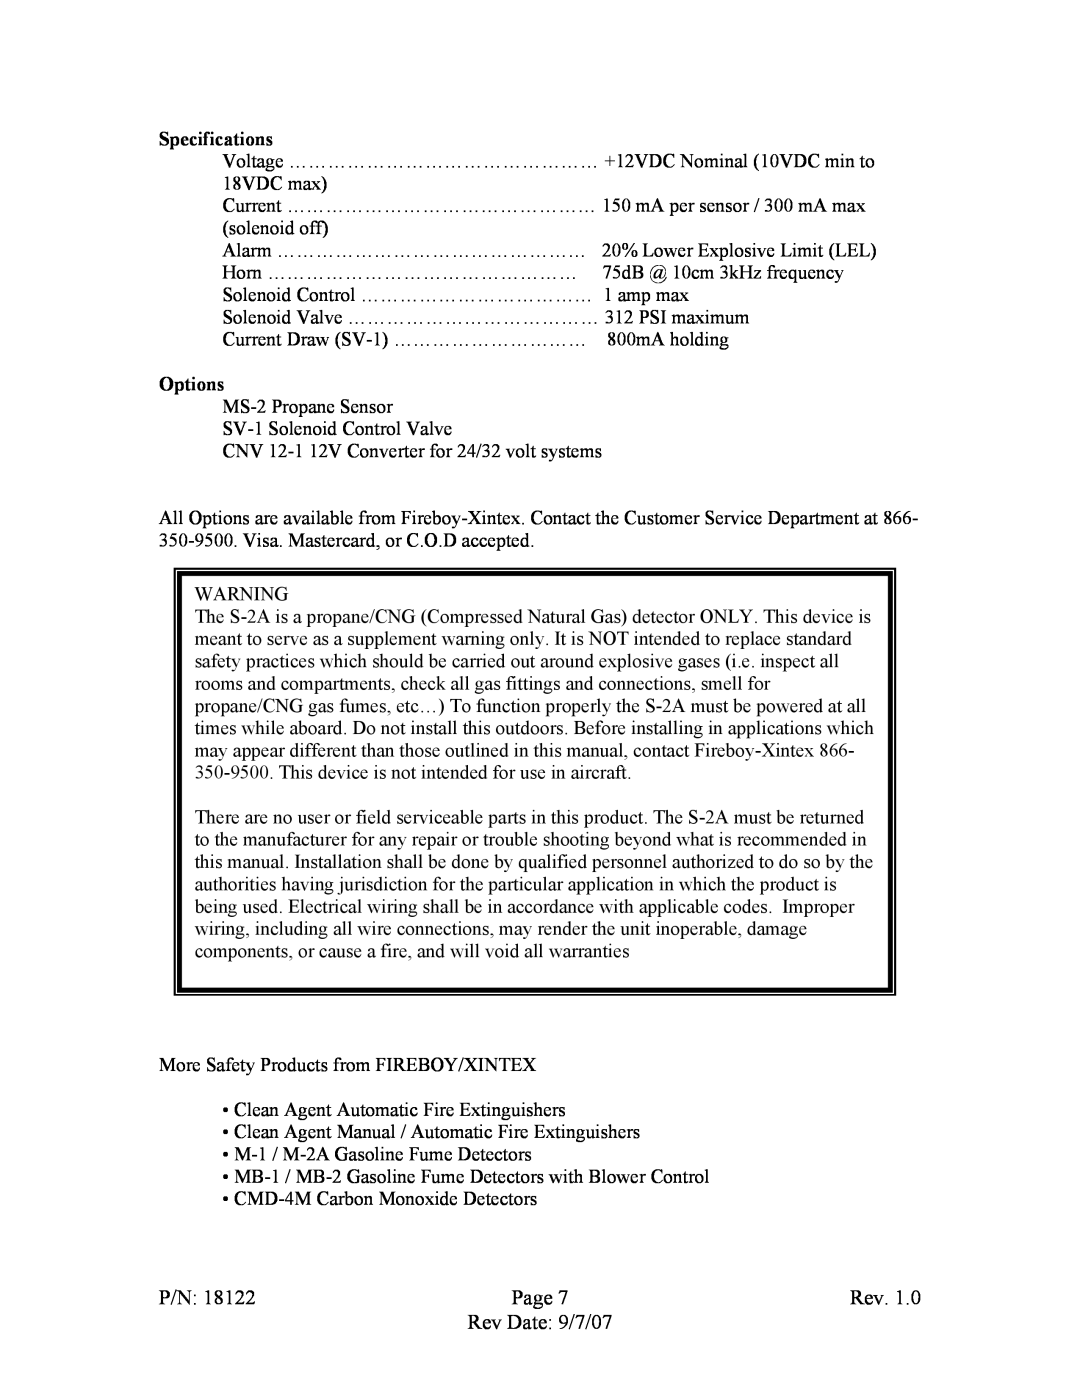 Fireboy- Xintex, LTD S-2A operation manual Specifications, Options, P/N, Page, Rev Date 9/7/07 